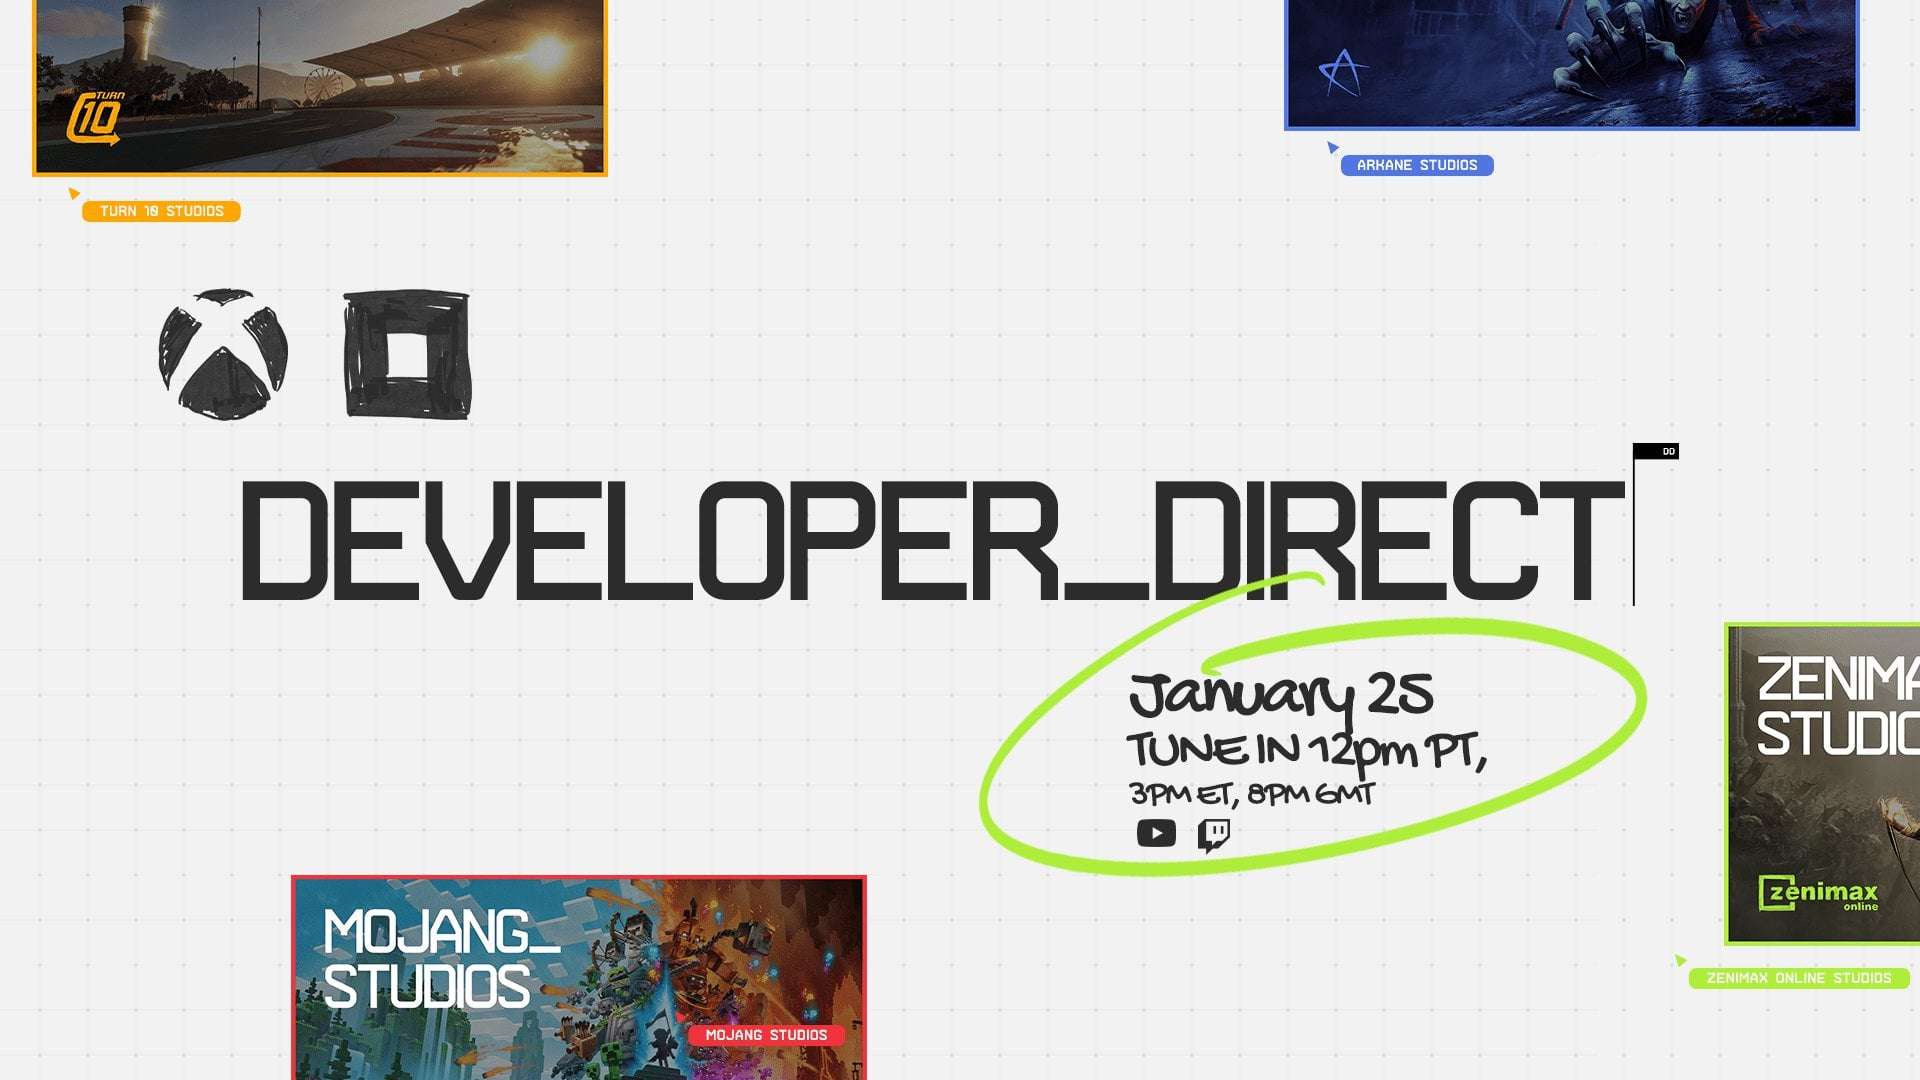 image for Xbox and Bethesda to Present Developer_Direct Livestream on January 25